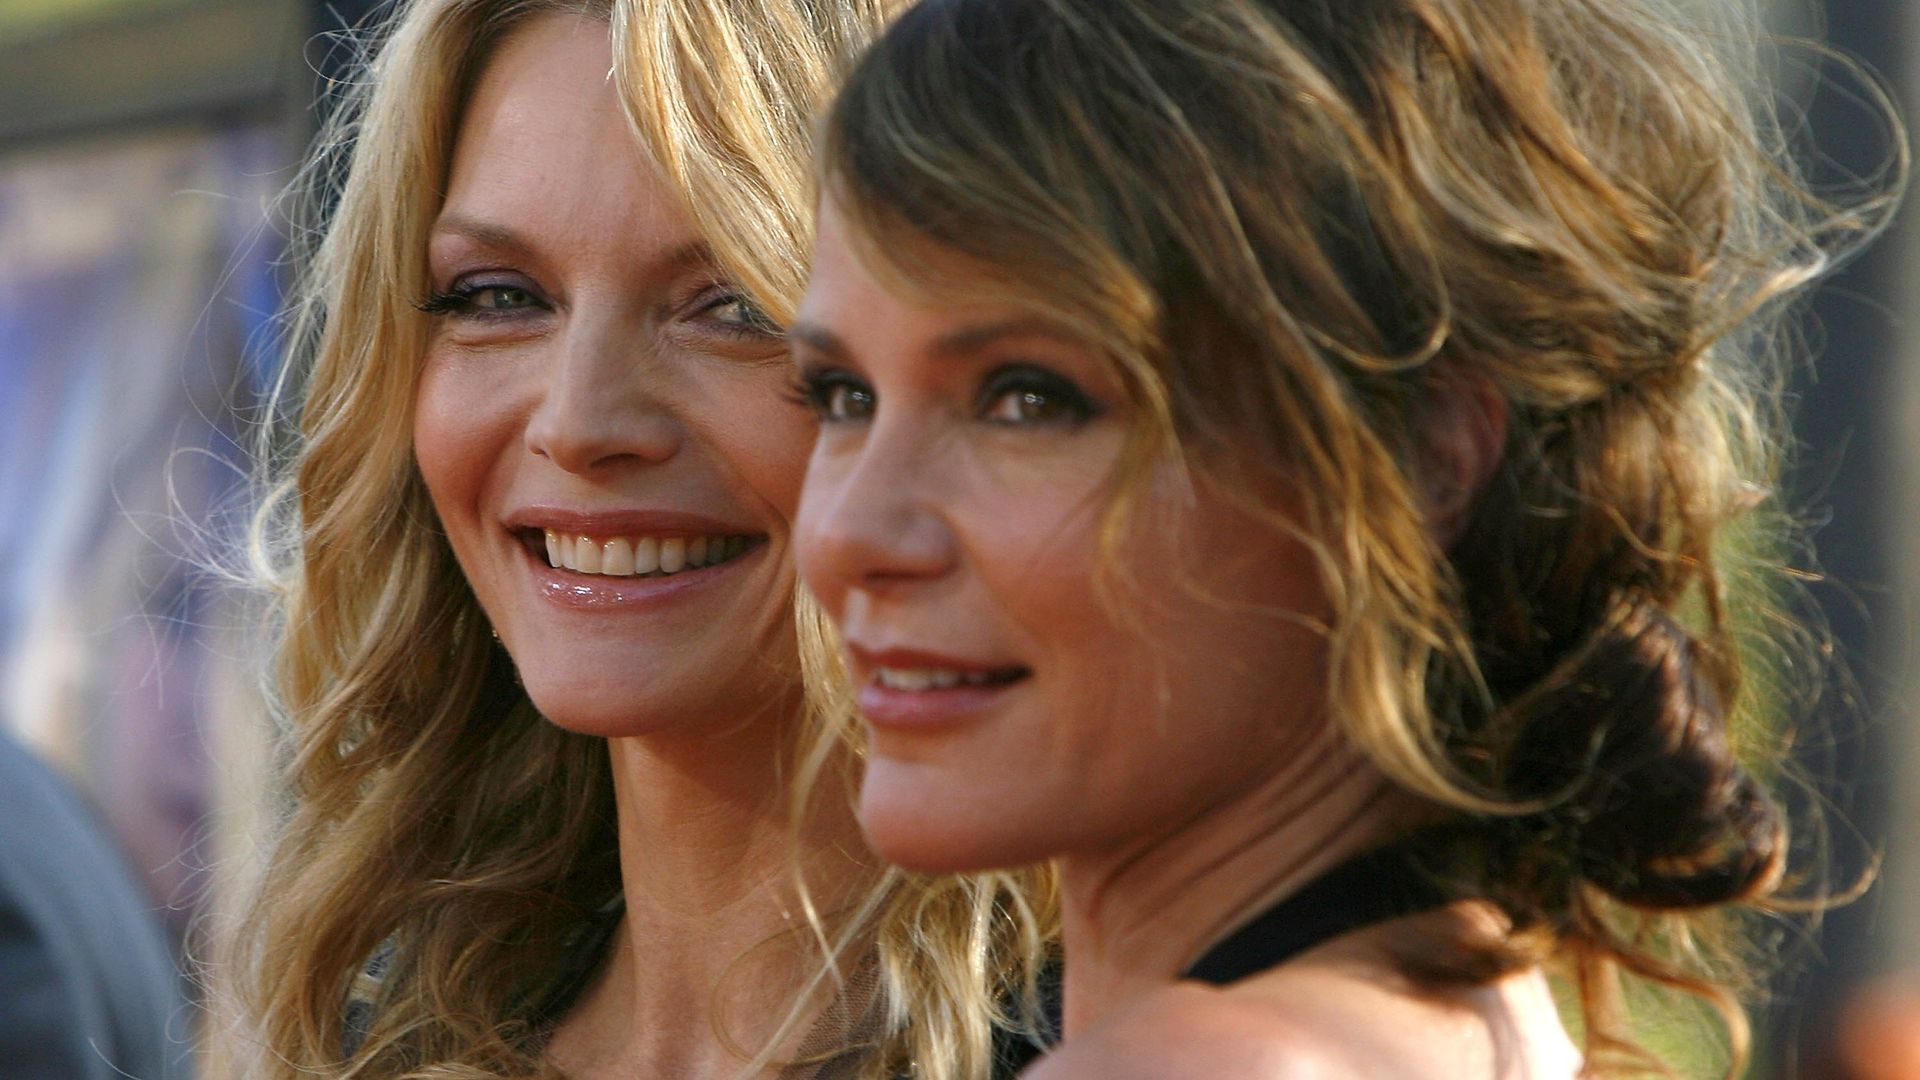 Michelle Pfeiffer and her sister actress Dedee Pfeiffer arrive at the premiere of Paramount Pictures' "Stardust" at the Paramount Studio Theater on July 29, 2007 in Los Angeles, California.  (Photo by Charley Gallay/Getty Images)